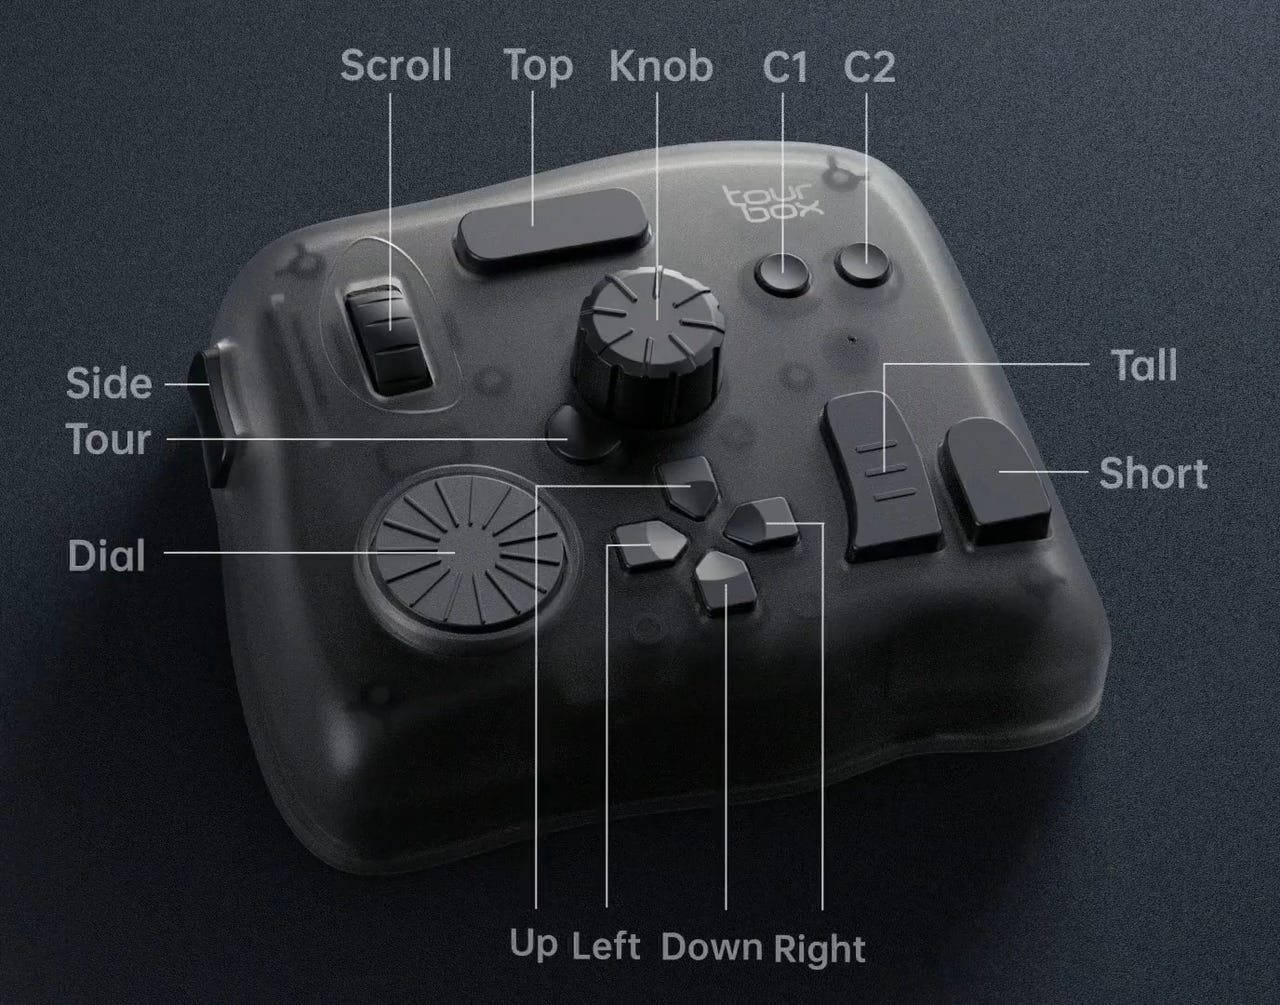 TouchBox Elite buttons and dials